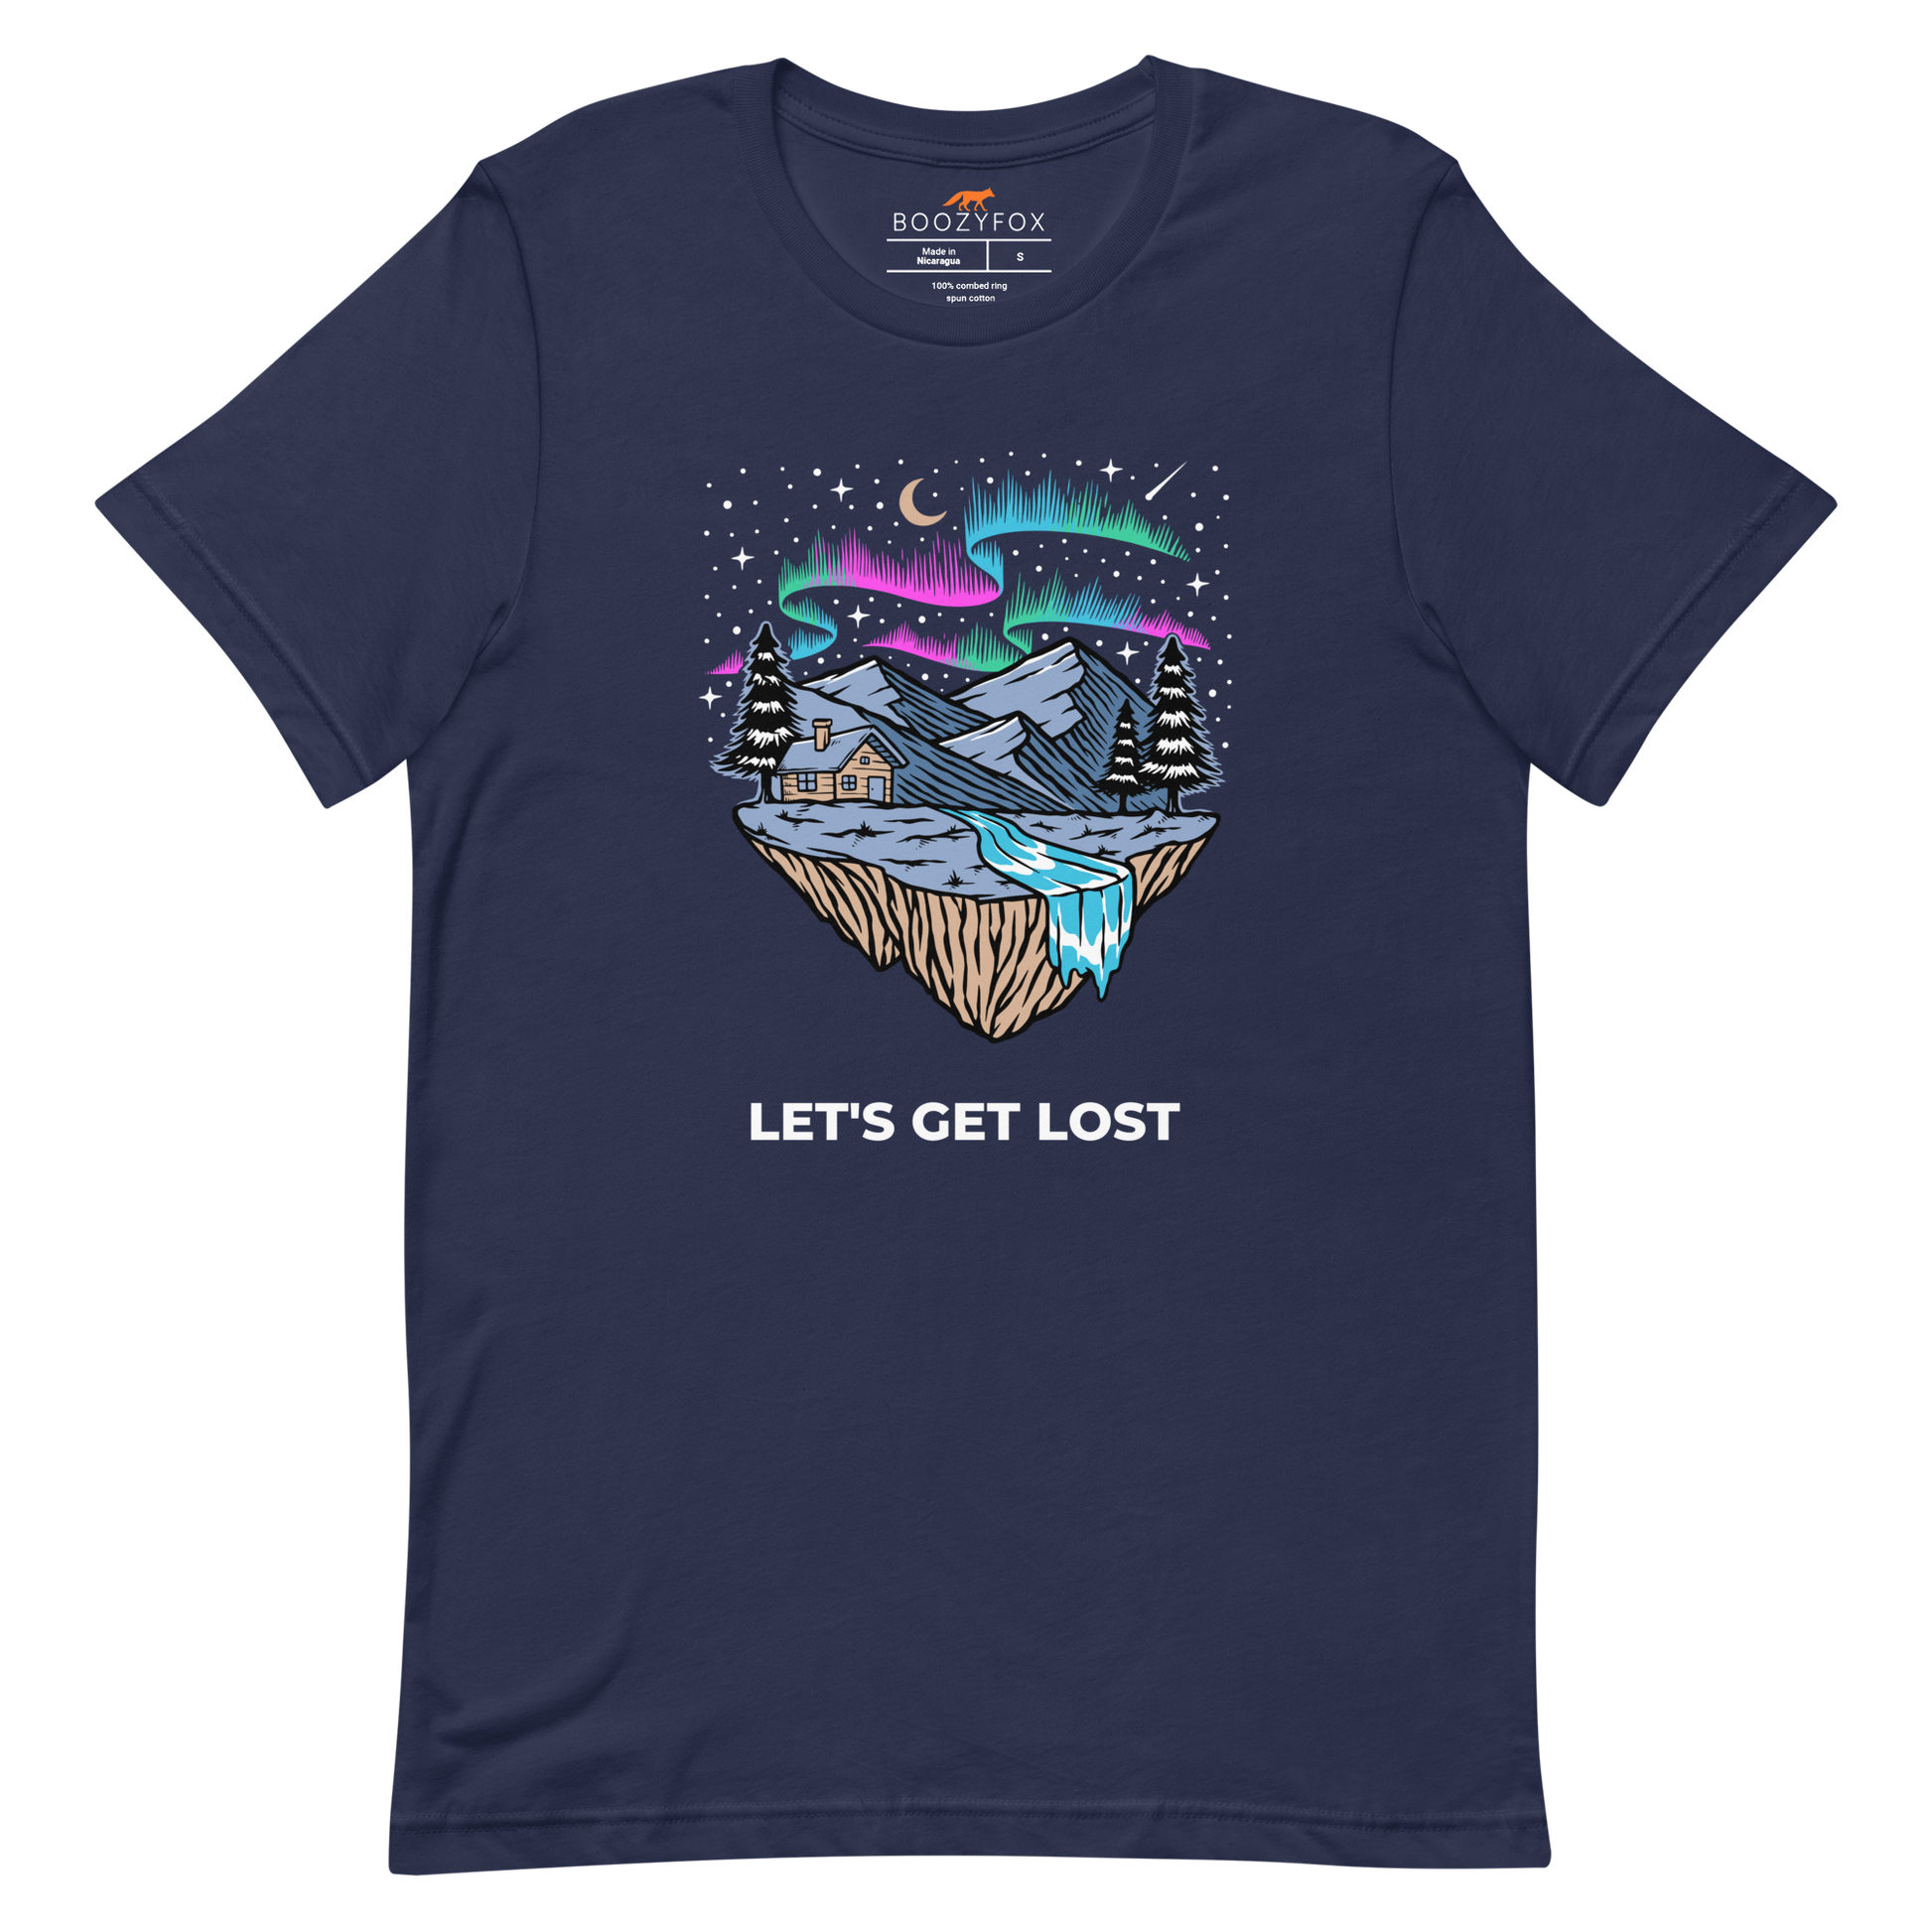 Navy Premium Let's Get Lost Tee featuring a mesmerizing night sky, adorned with stars and aurora borealis graphic on the chest - Cool Graphic Northern Lights Tees - Boozy Fox